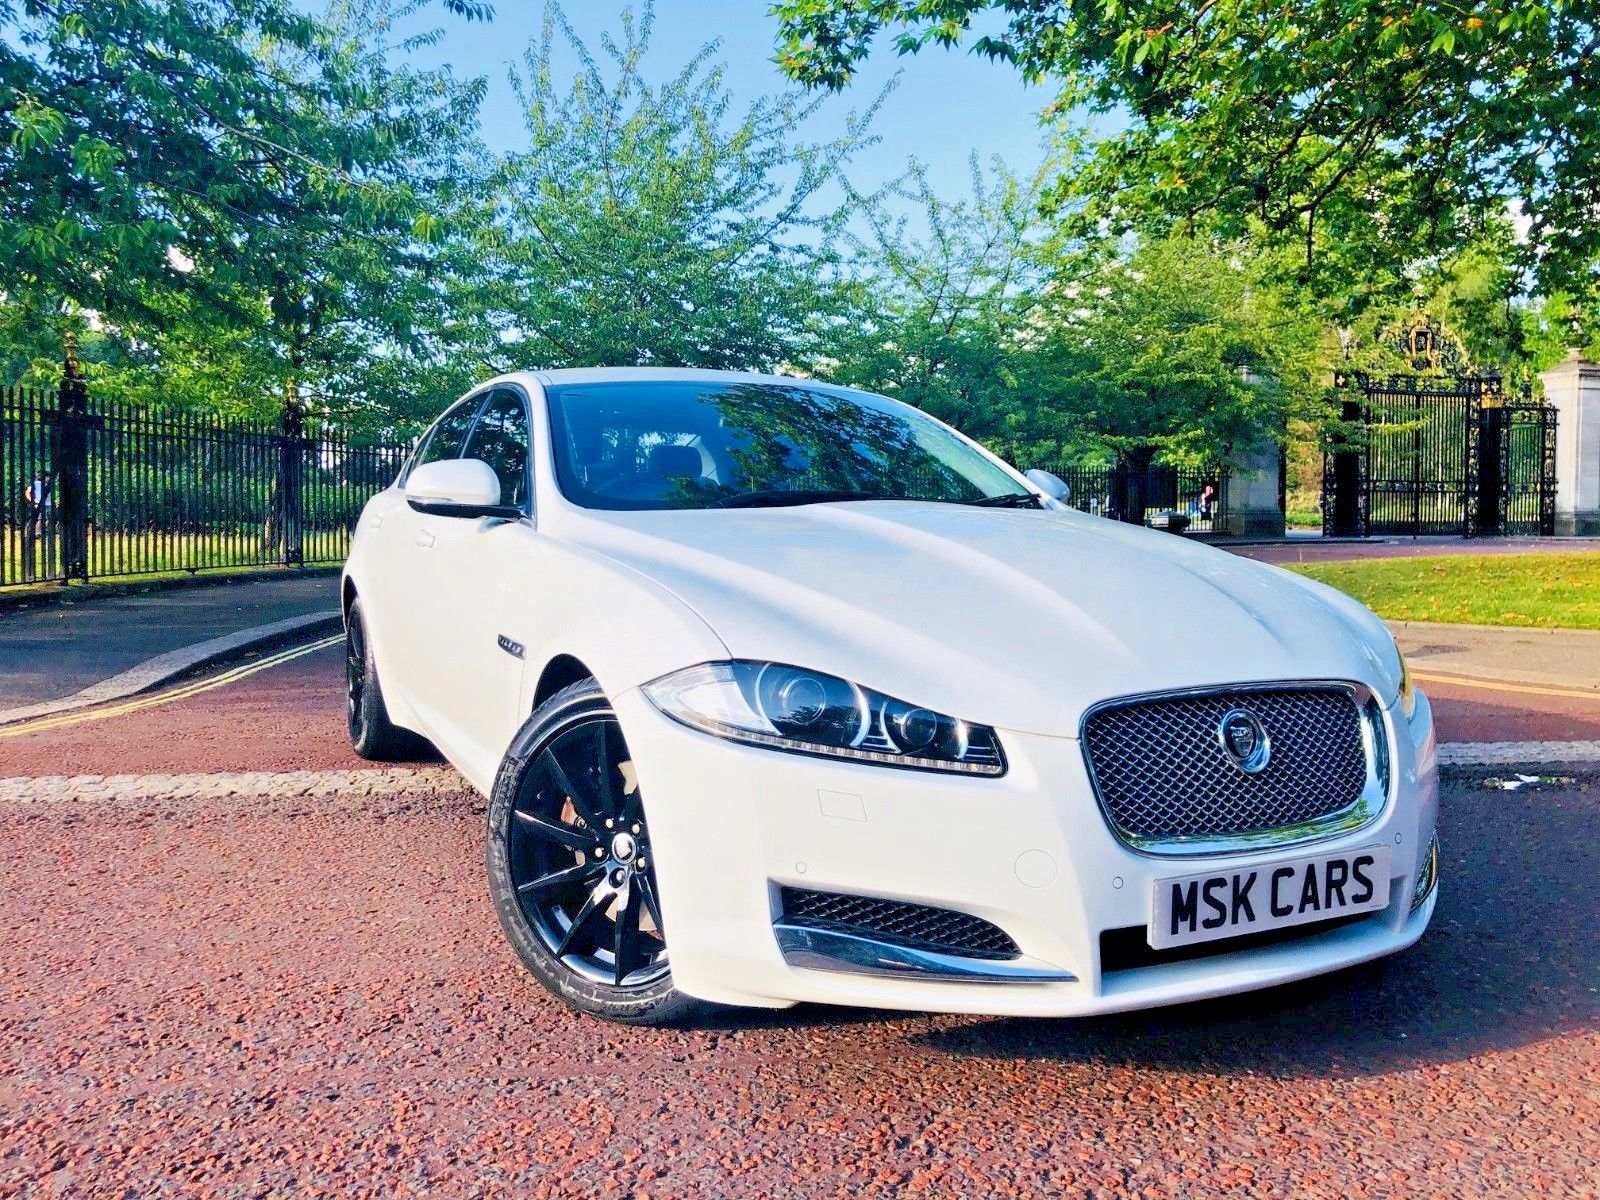 2012 Jaguar XF 2.2 Luxury presented in the factory White